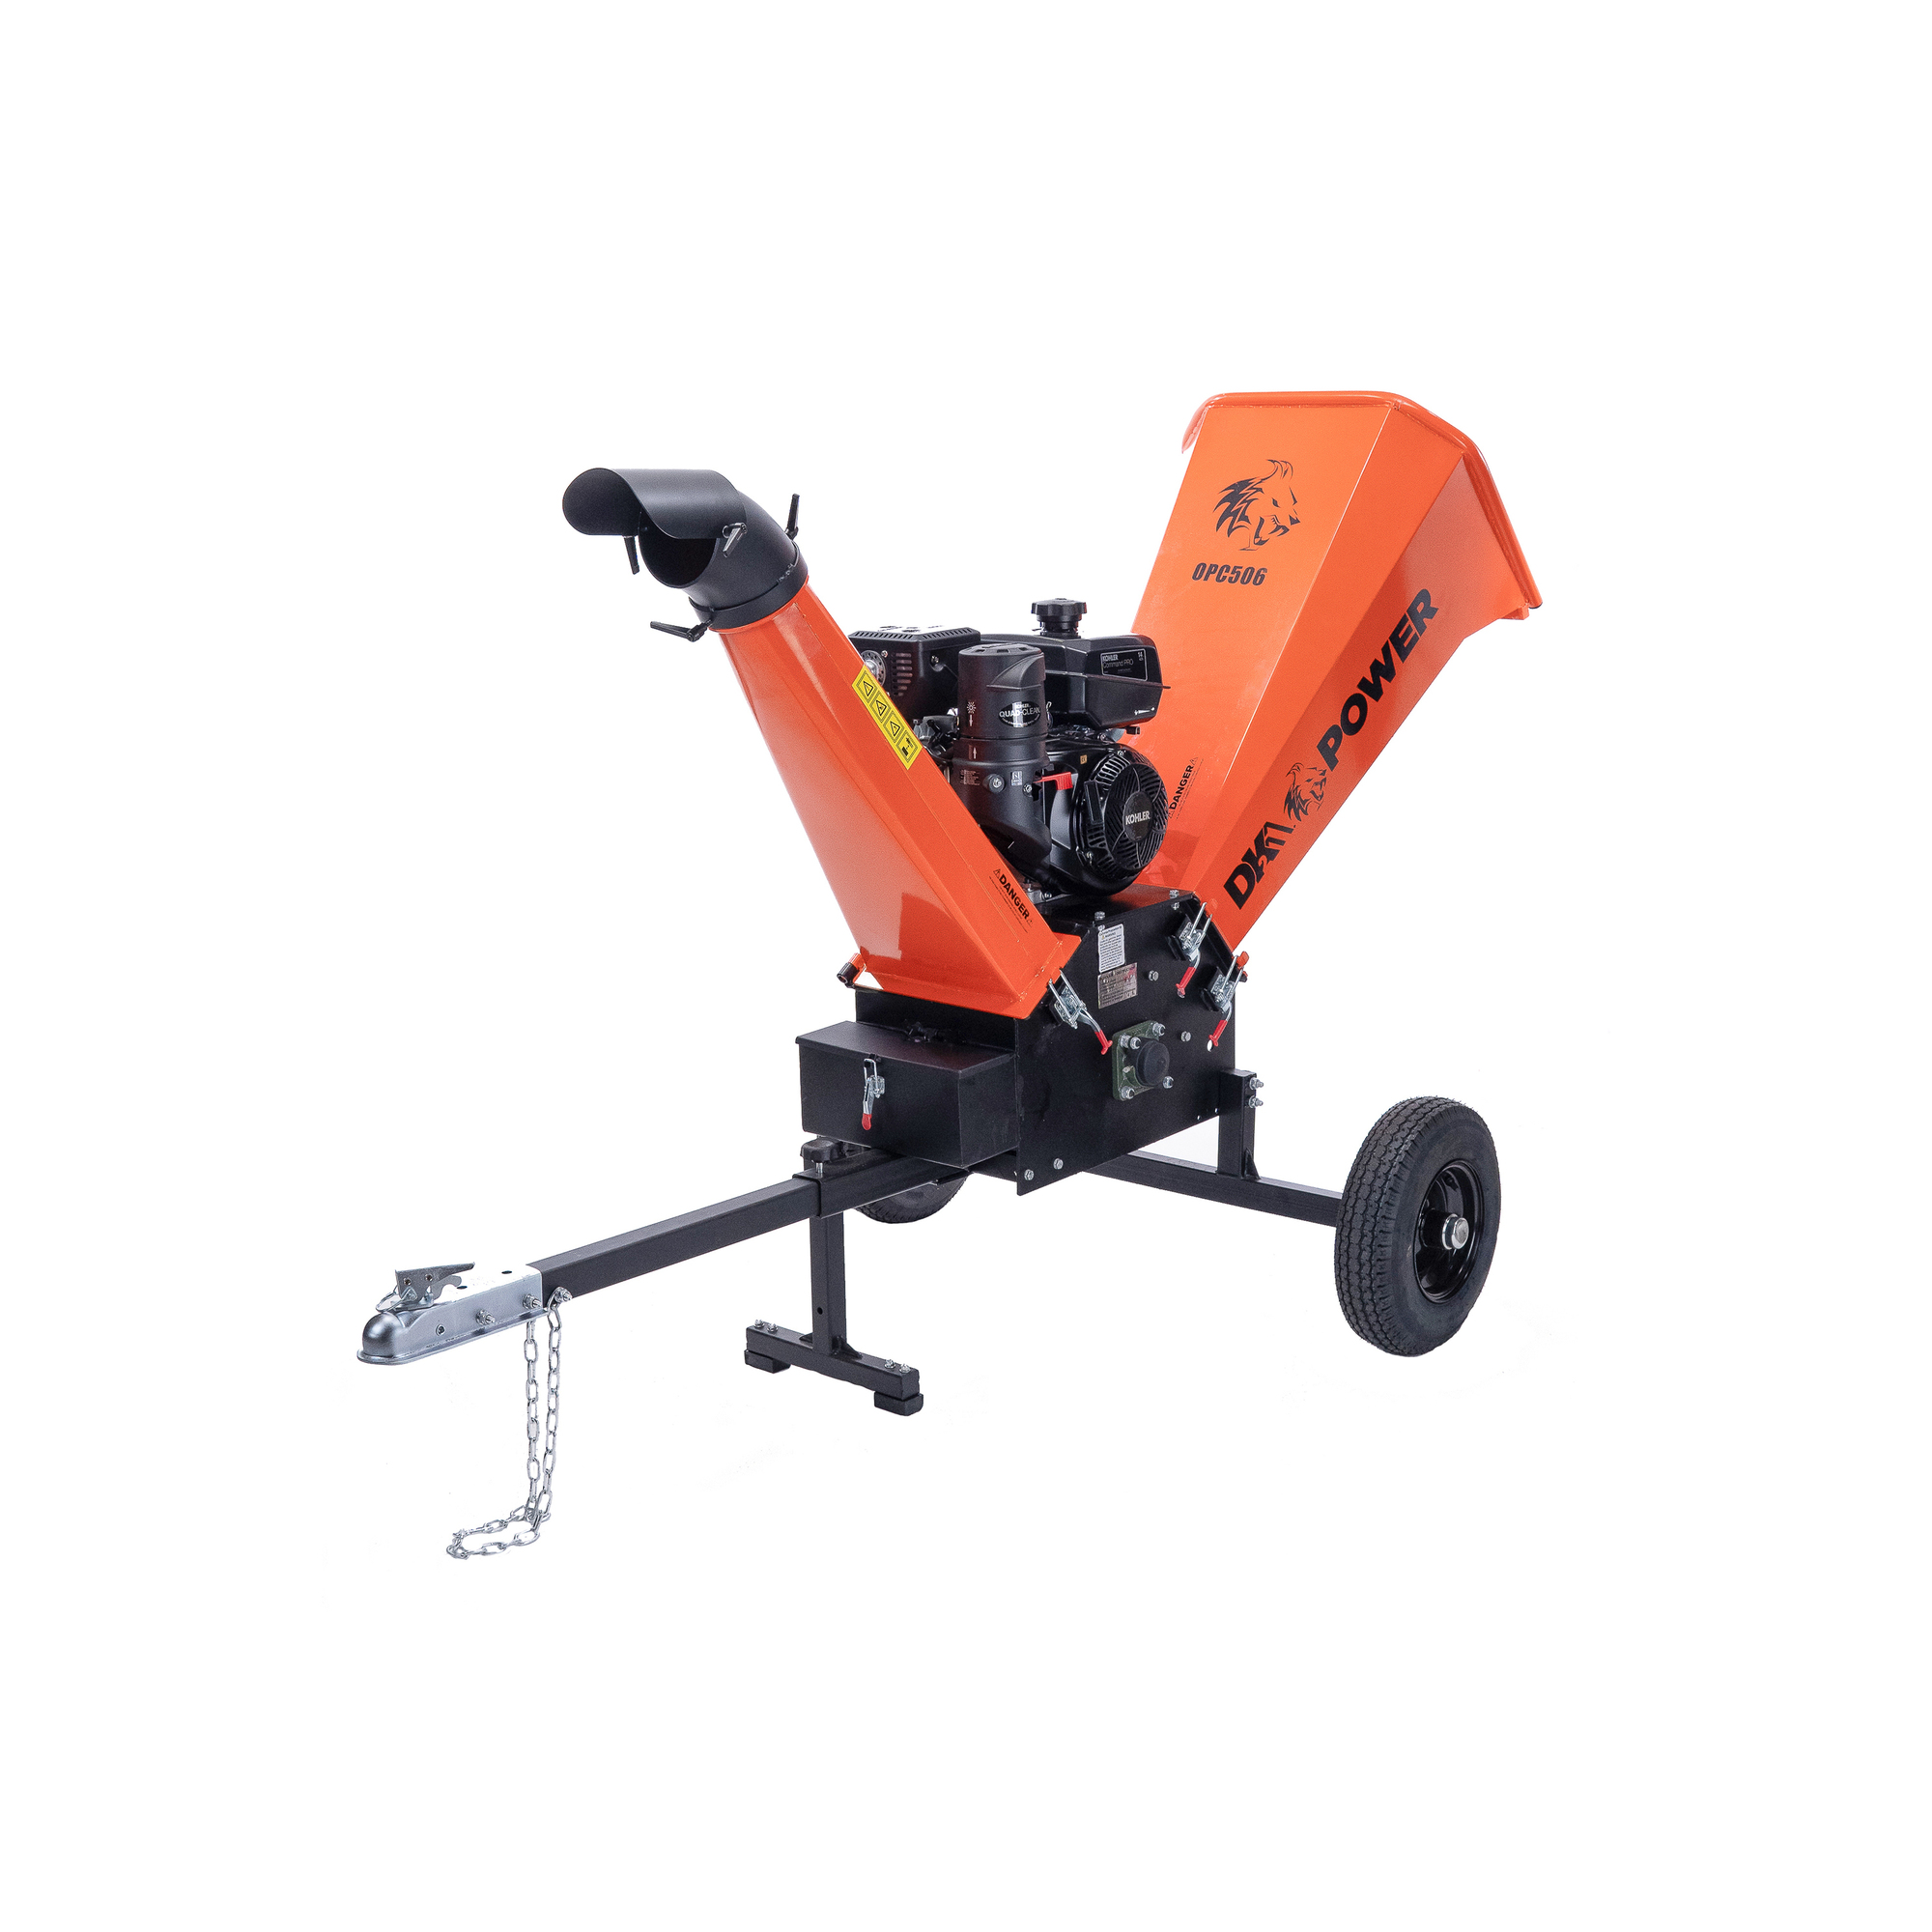 DK2 Power Commercial Cyclonic Chipper Shredder, Engine Displacement 429 cc, 14 HP, 6Inch Cutting, Model OPC506